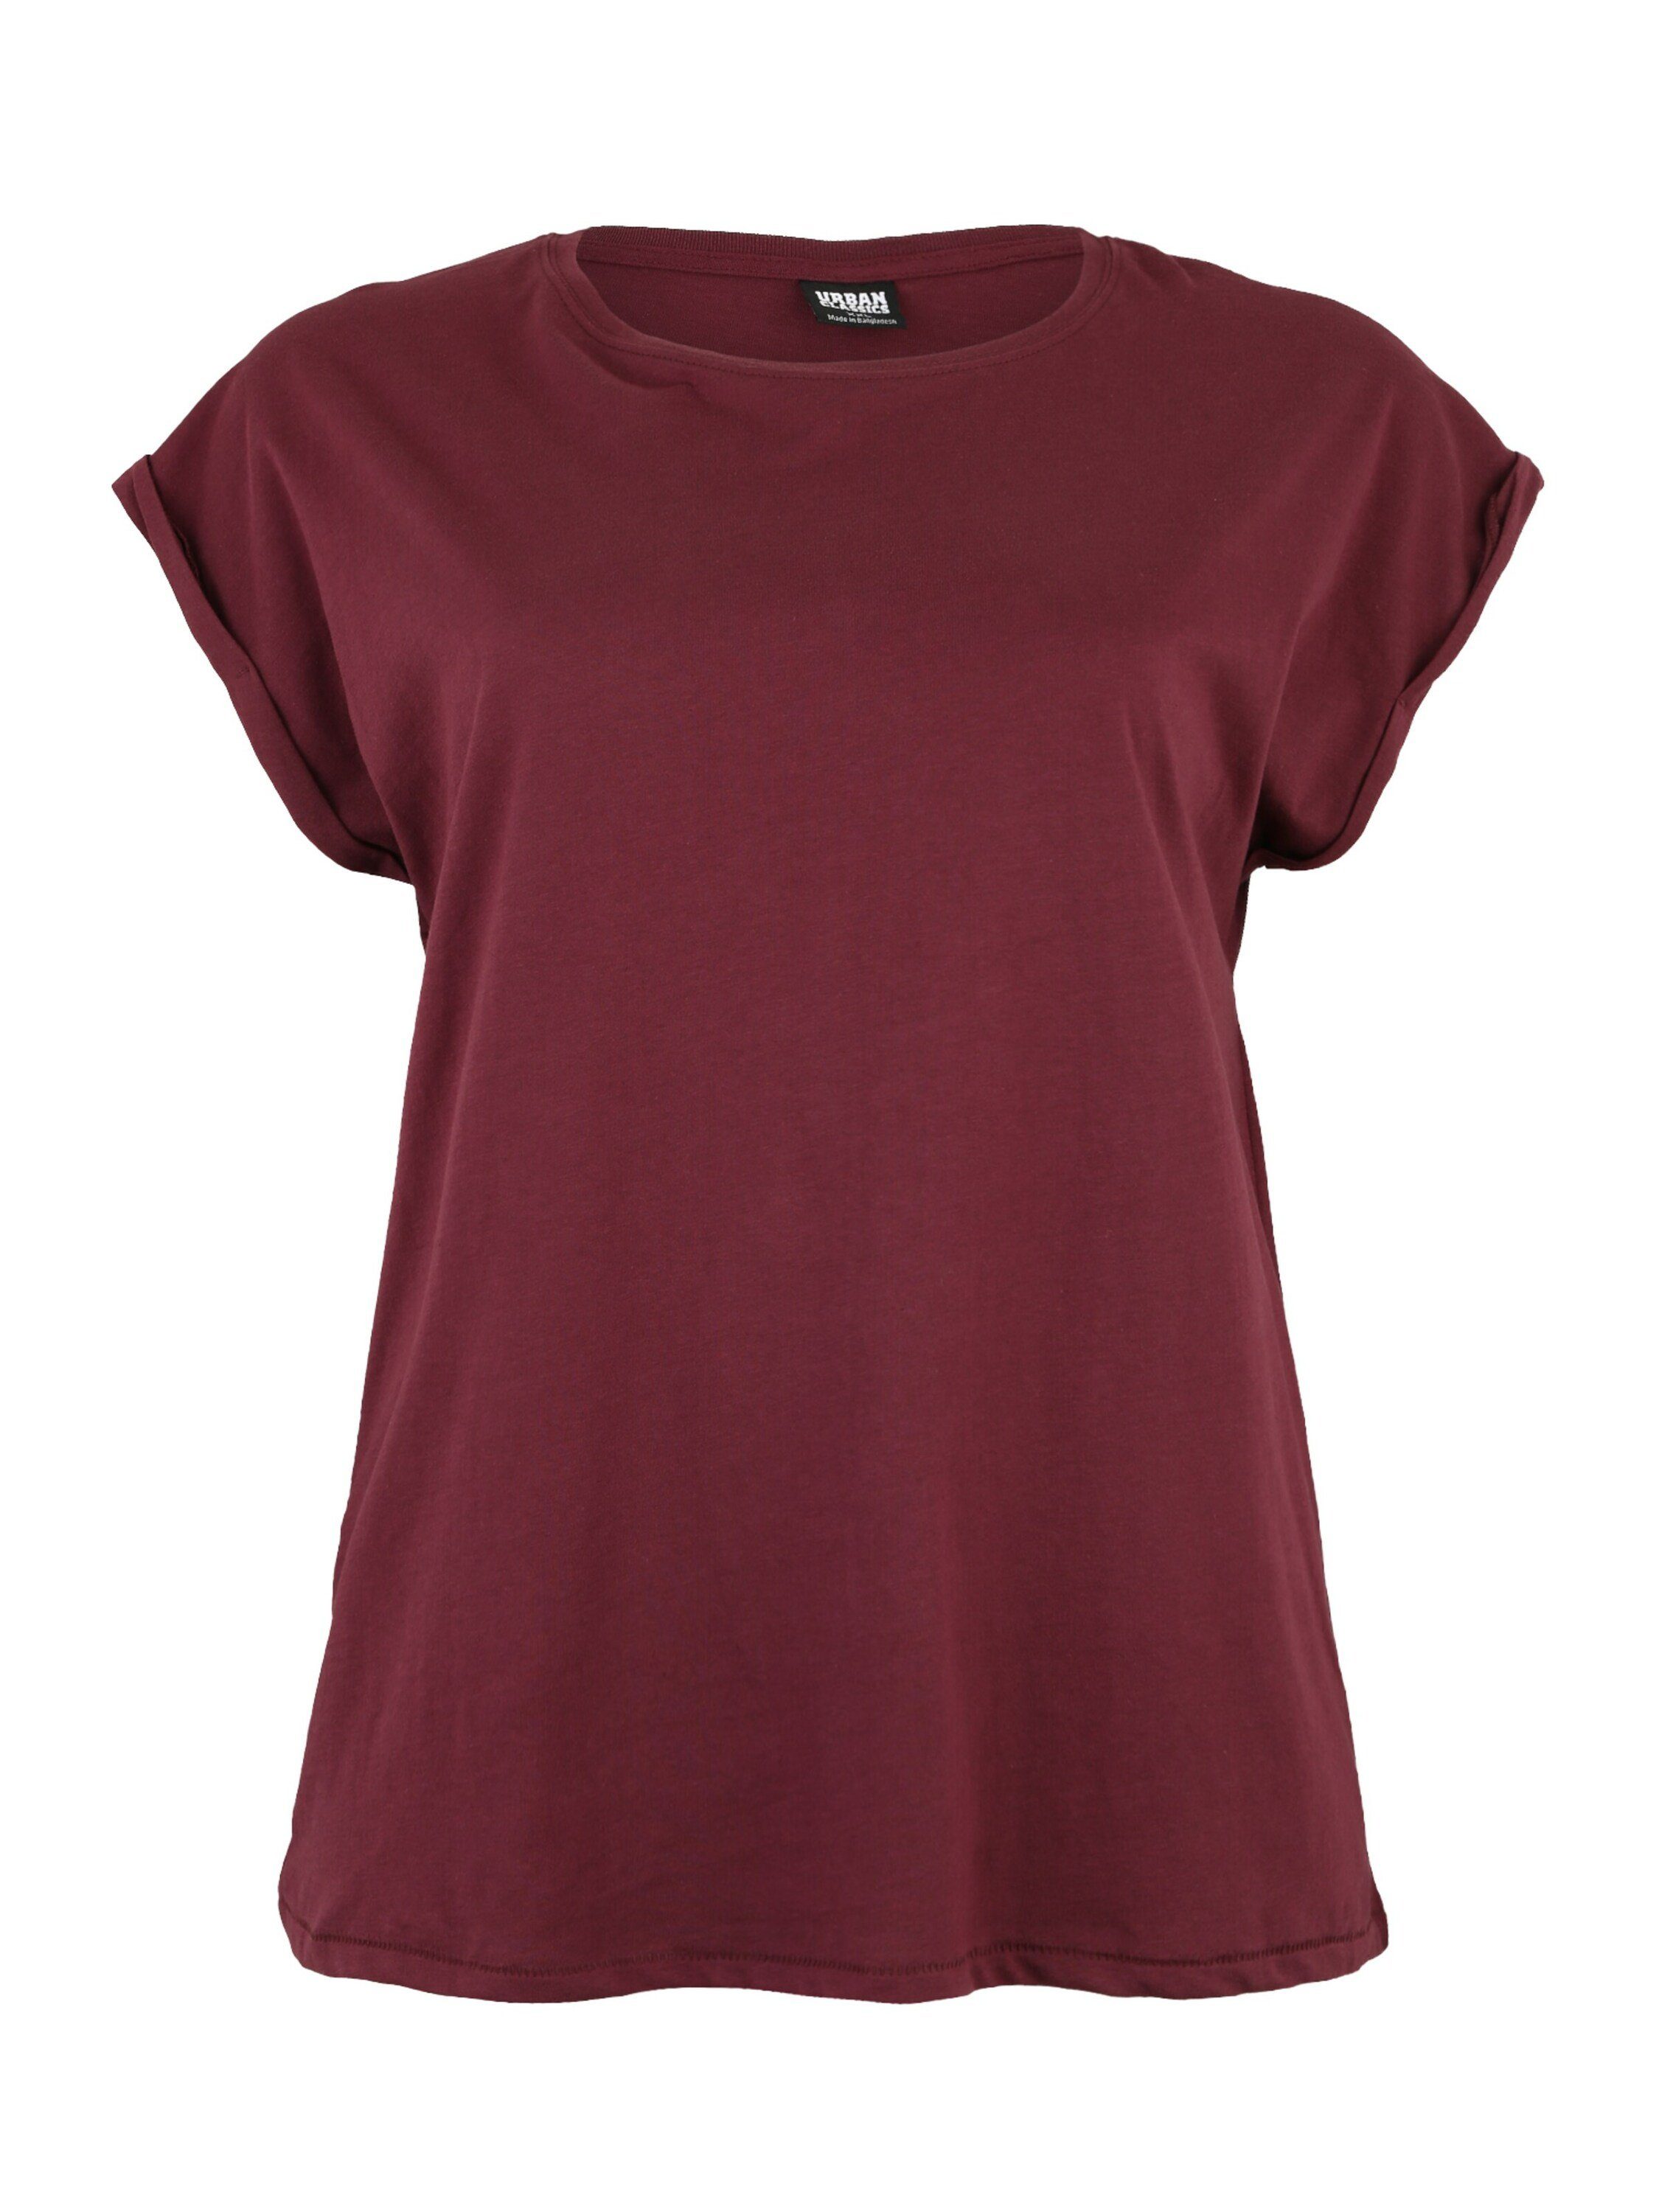 Plain/ohne (1-tlg) Details, T-Shirt CLASSICS Detail URBAN brombeer Weiteres